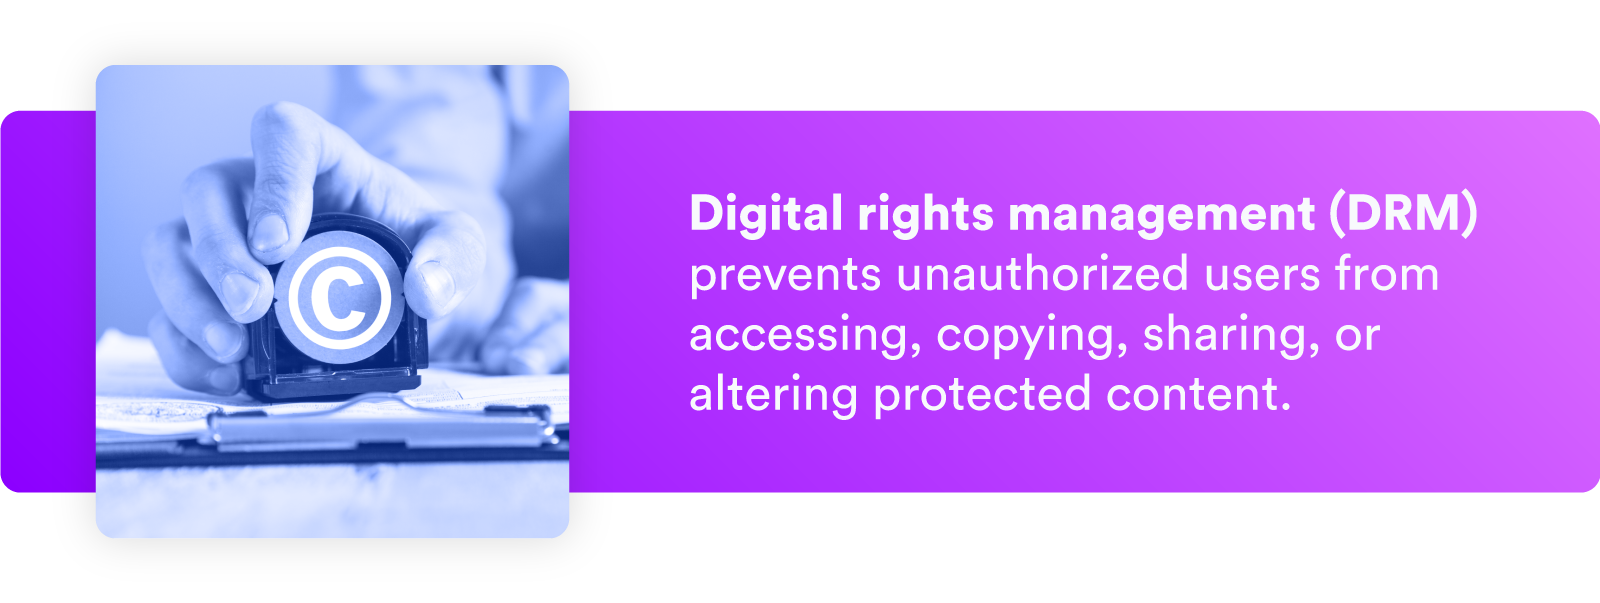 Digital rights management can help prevent copyright infringement and piracy.